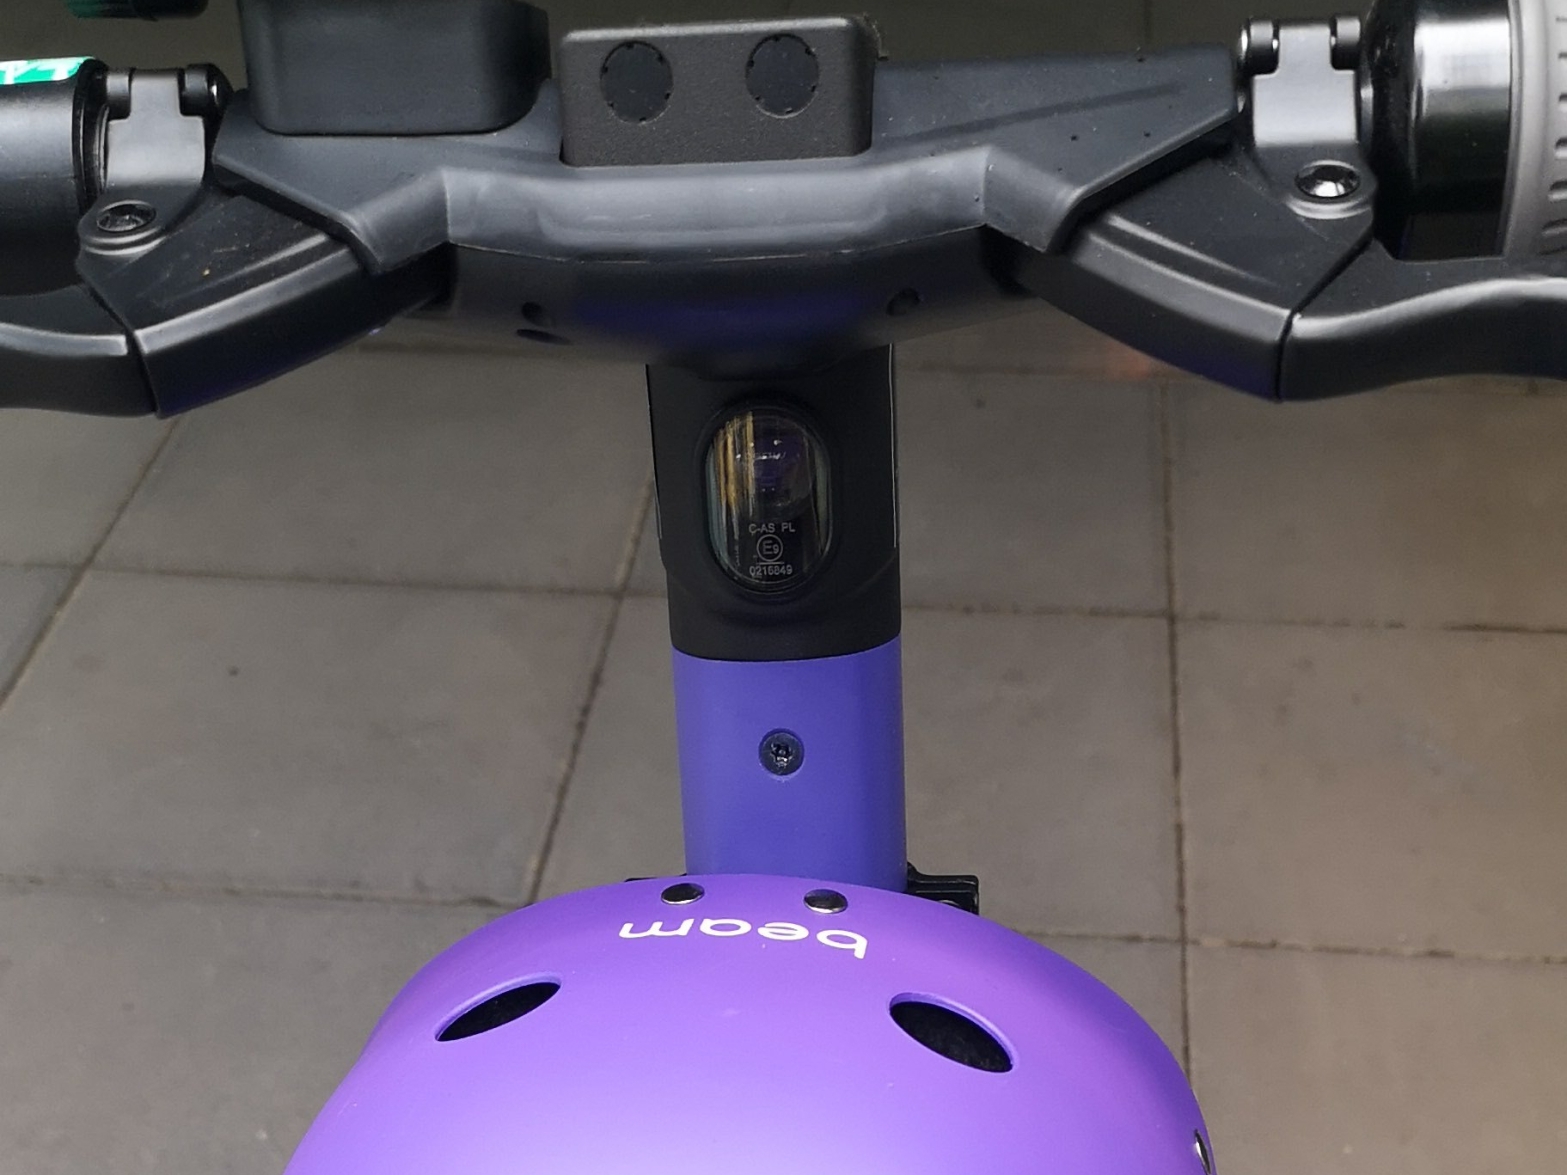 beam electric scooters, October 2020